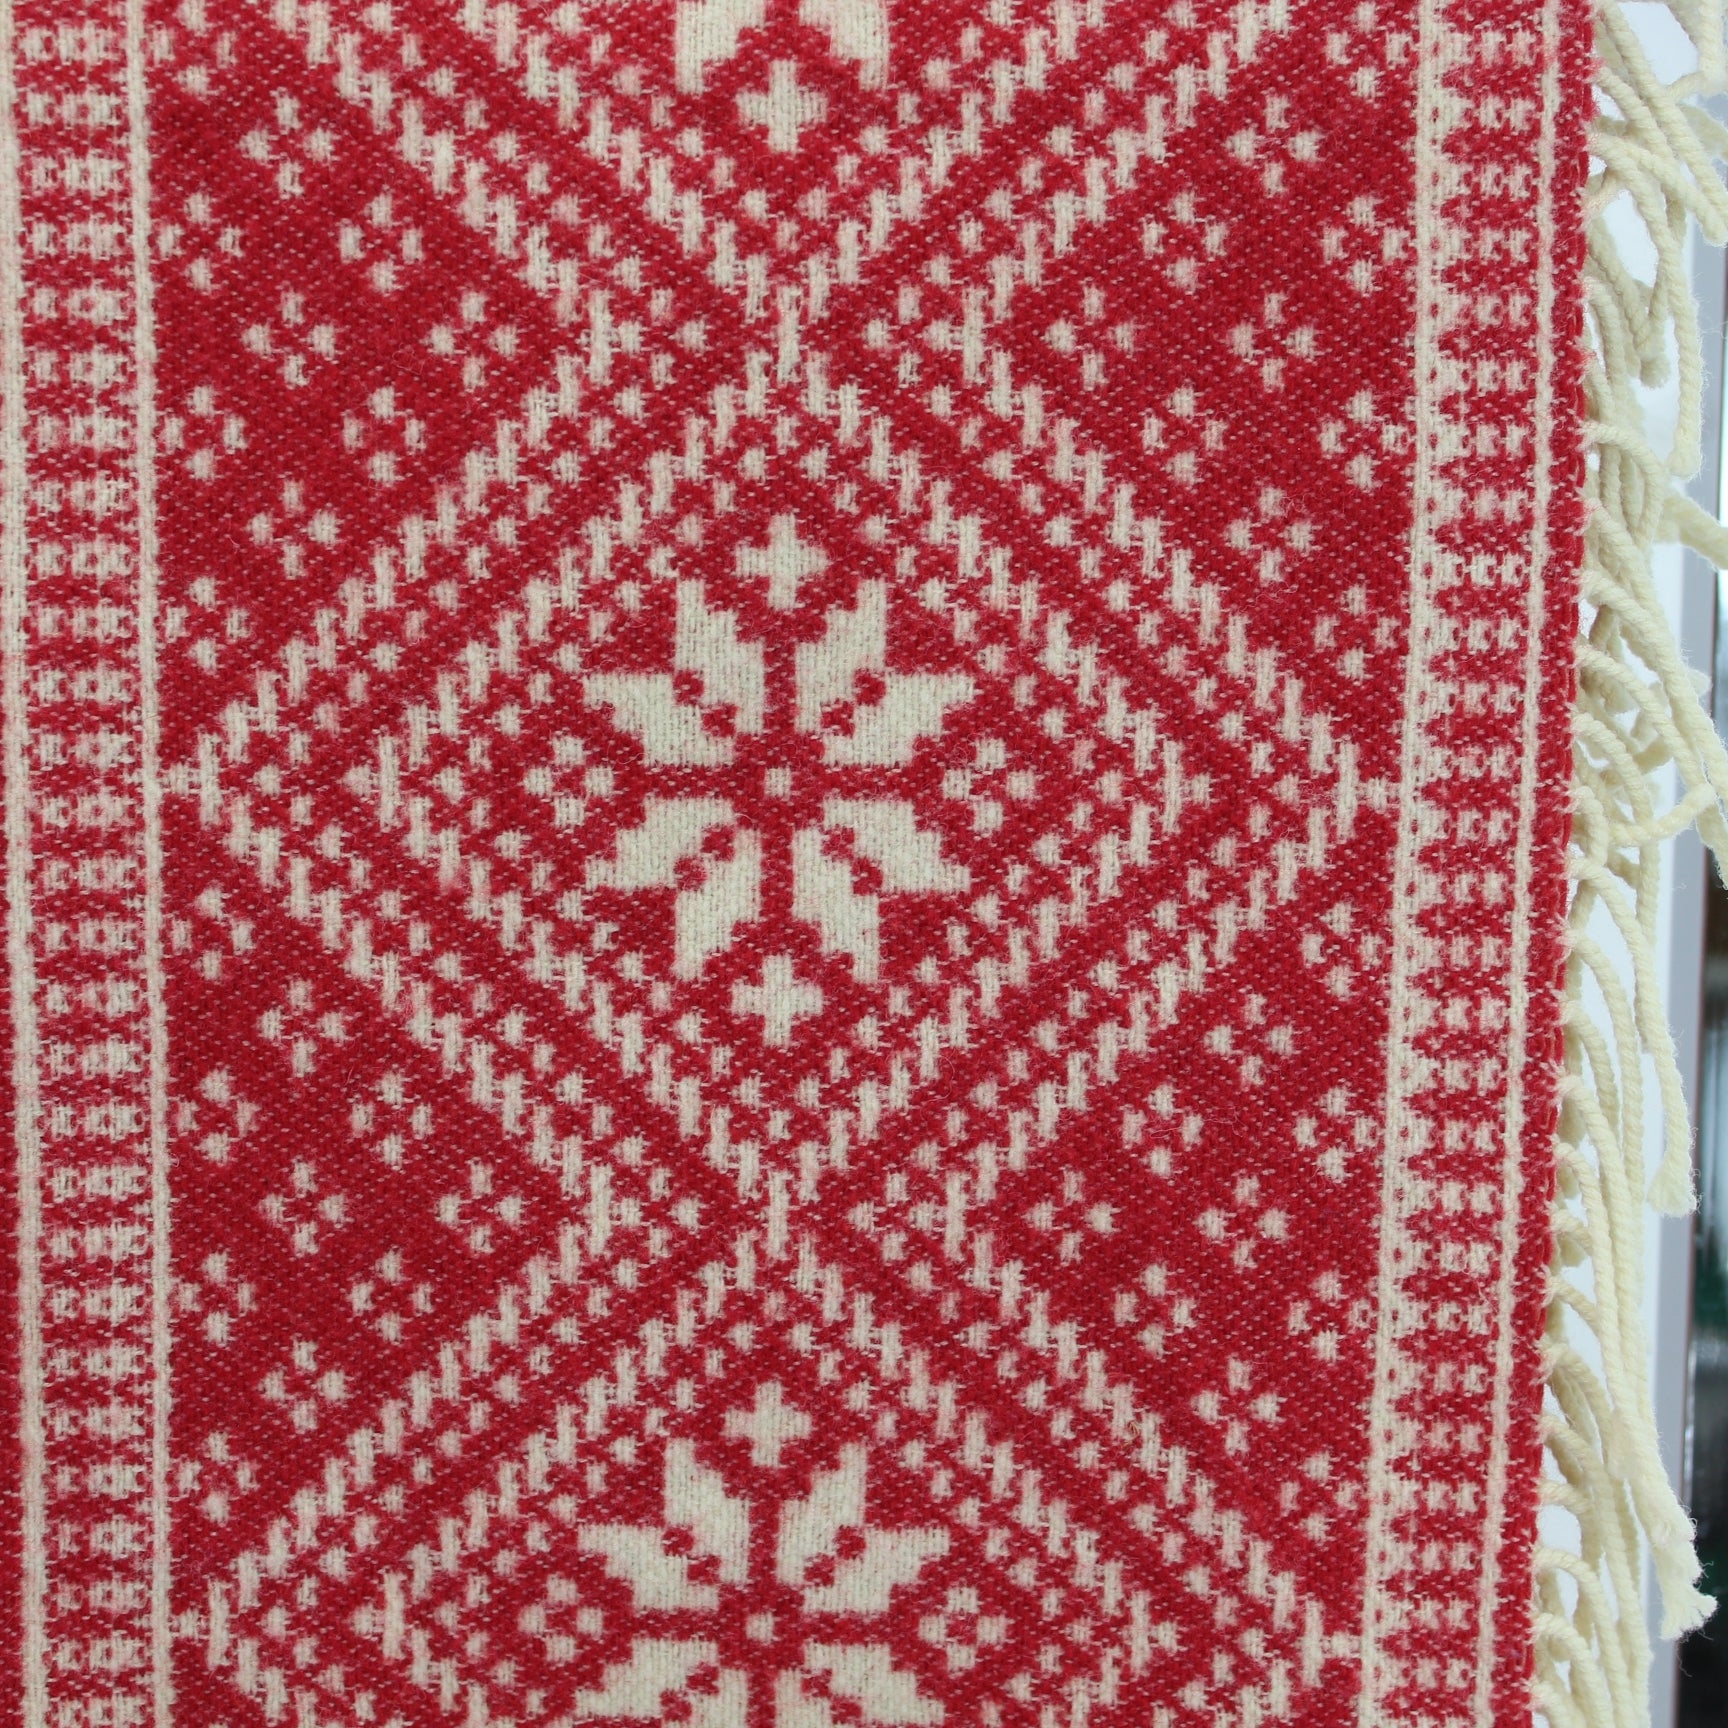 Coming Home Wool Throw Holiday Winter Snowflake Design Red White 2 Available closeup of border and fringe